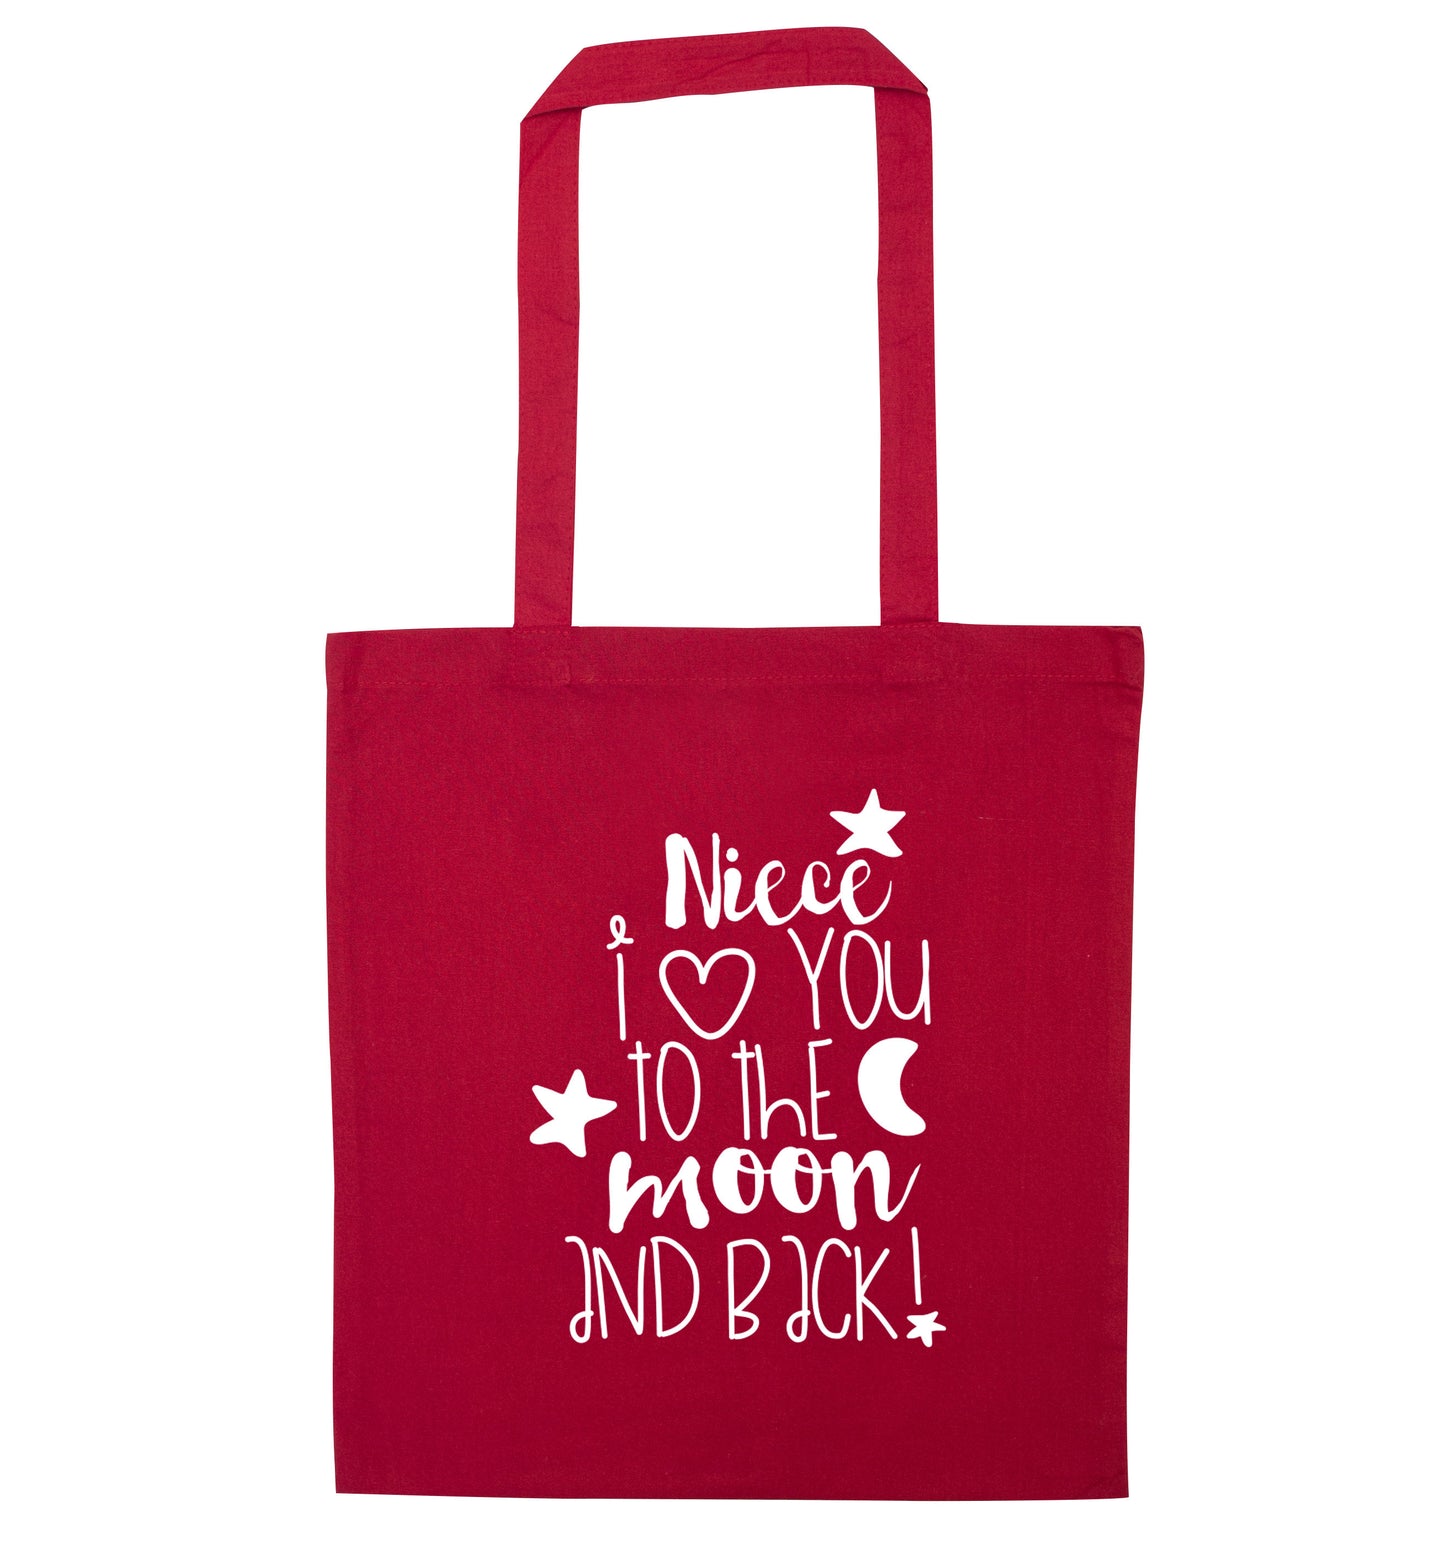 Niece I love you to the moon and back red tote bag